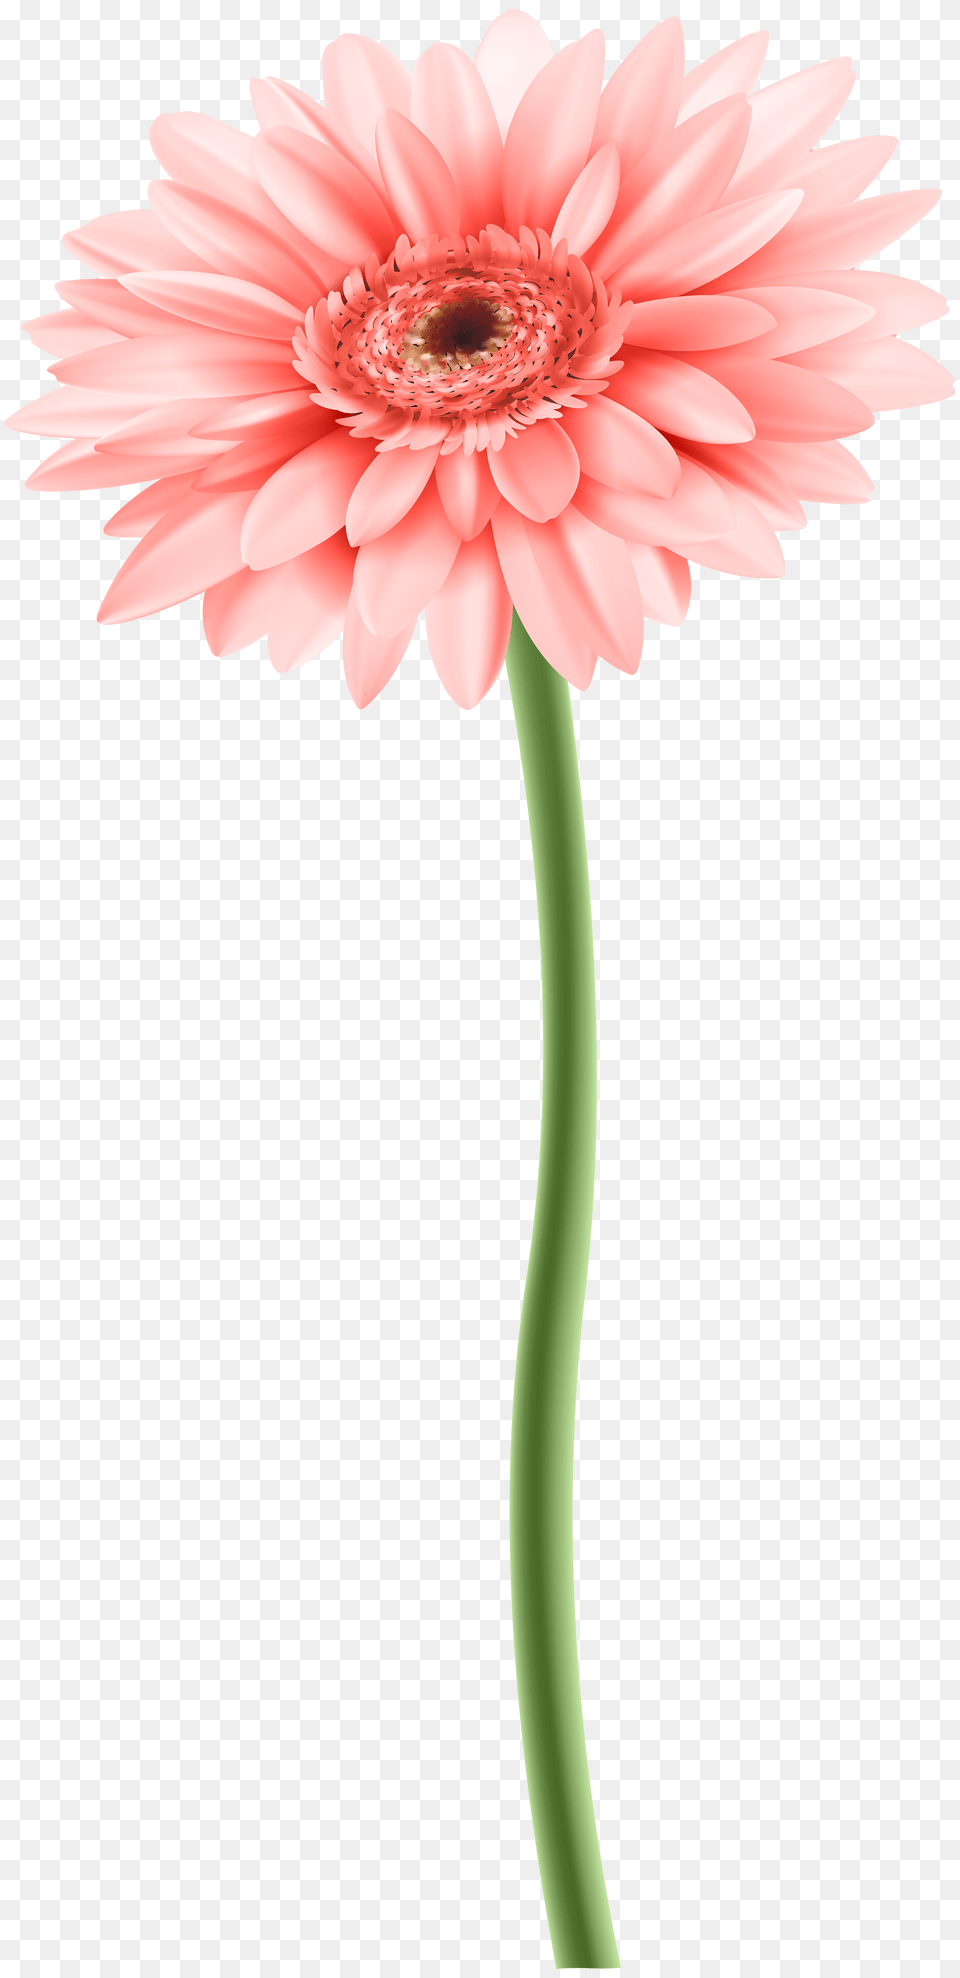 Download Flower With Stem Flower With Stem, Daisy, Plant, Dahlia, Chandelier Png